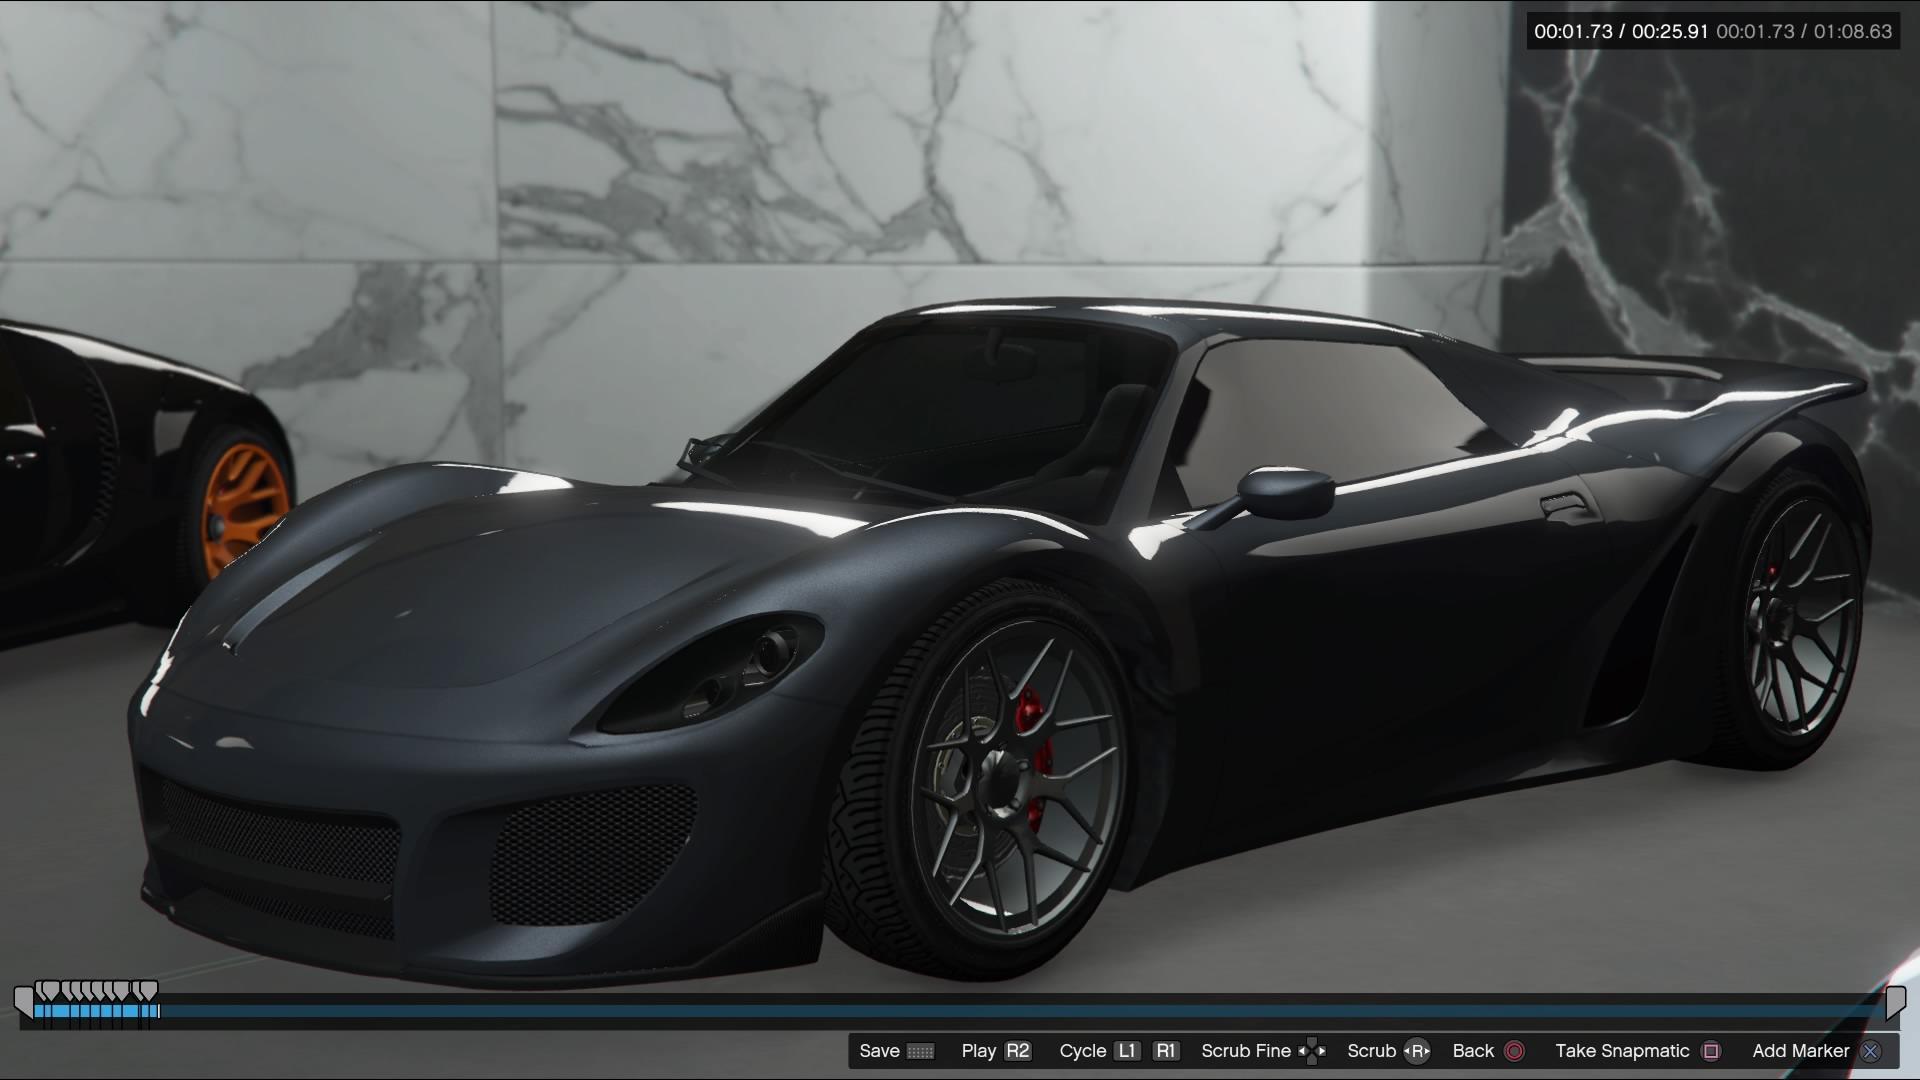 Pfister 811 Gta 5 Online Vehicle Stats Price How To Get